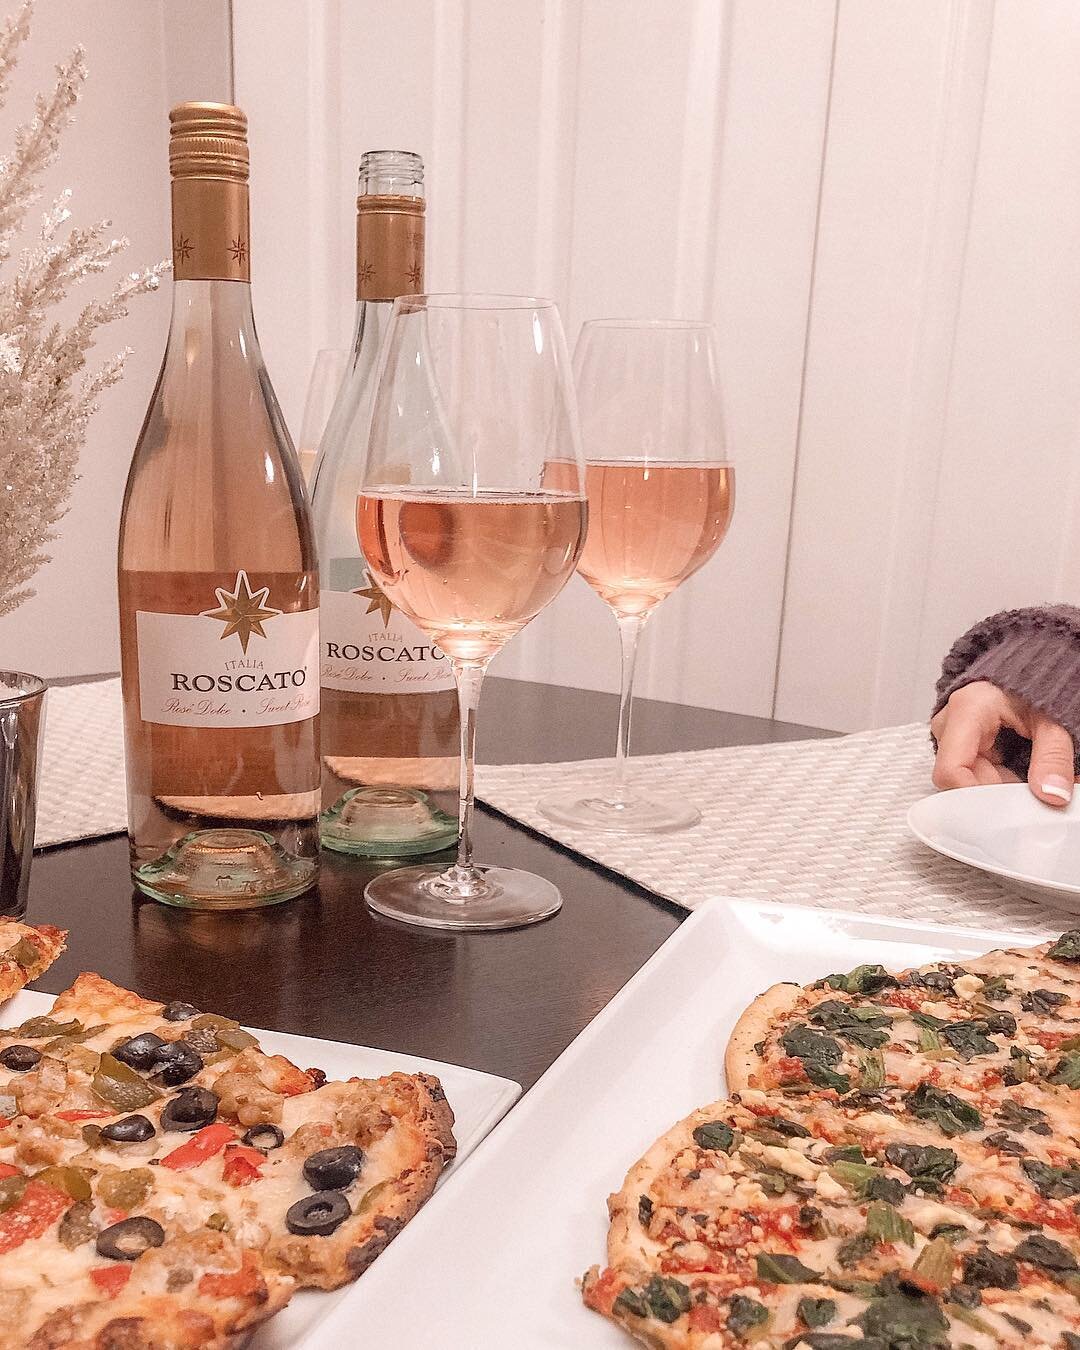 There&rsquo;s nothing better than girls night in! I prefer staying in eating pizza and drinking some wine than going out. Adulting at its finest!🤗🍕🍷 If you&rsquo;re like me and likes wine more on the sweet side, then you&rsquo;ll love the new Dolc